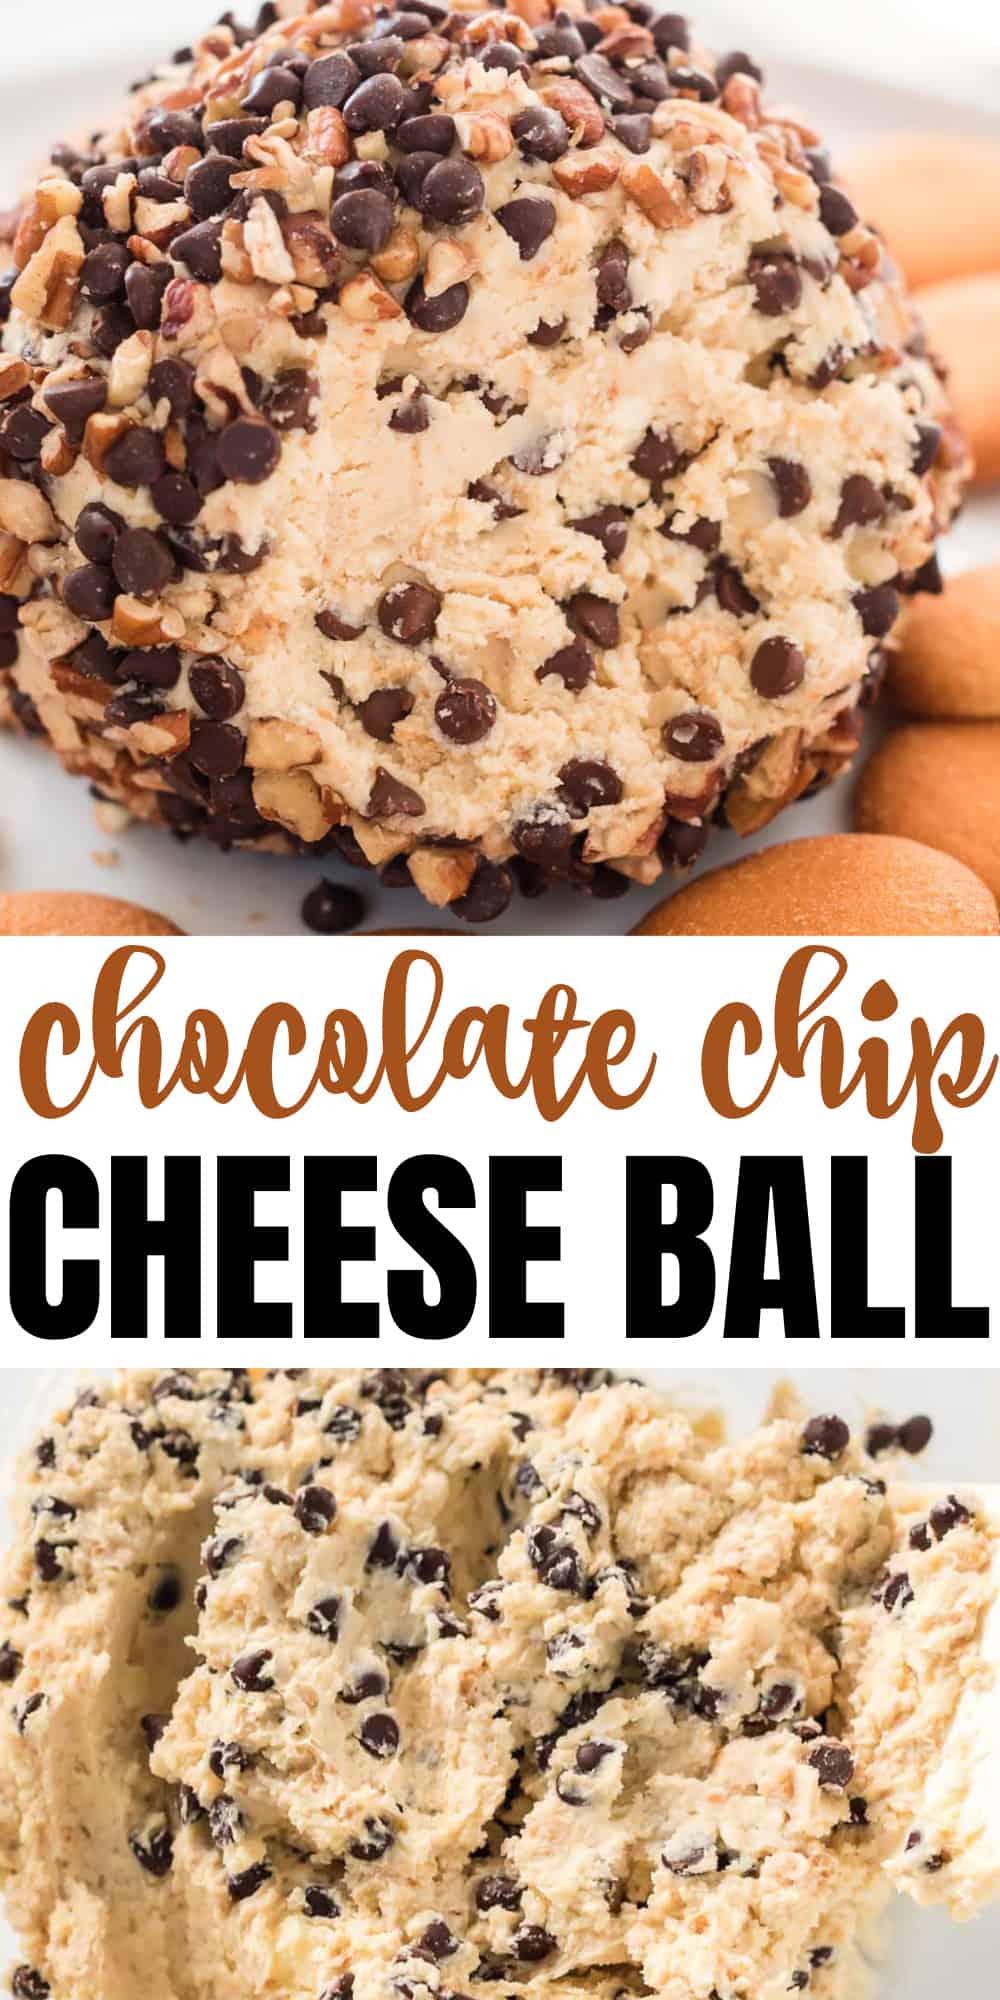 image with text "chocolate chip cheese ball"